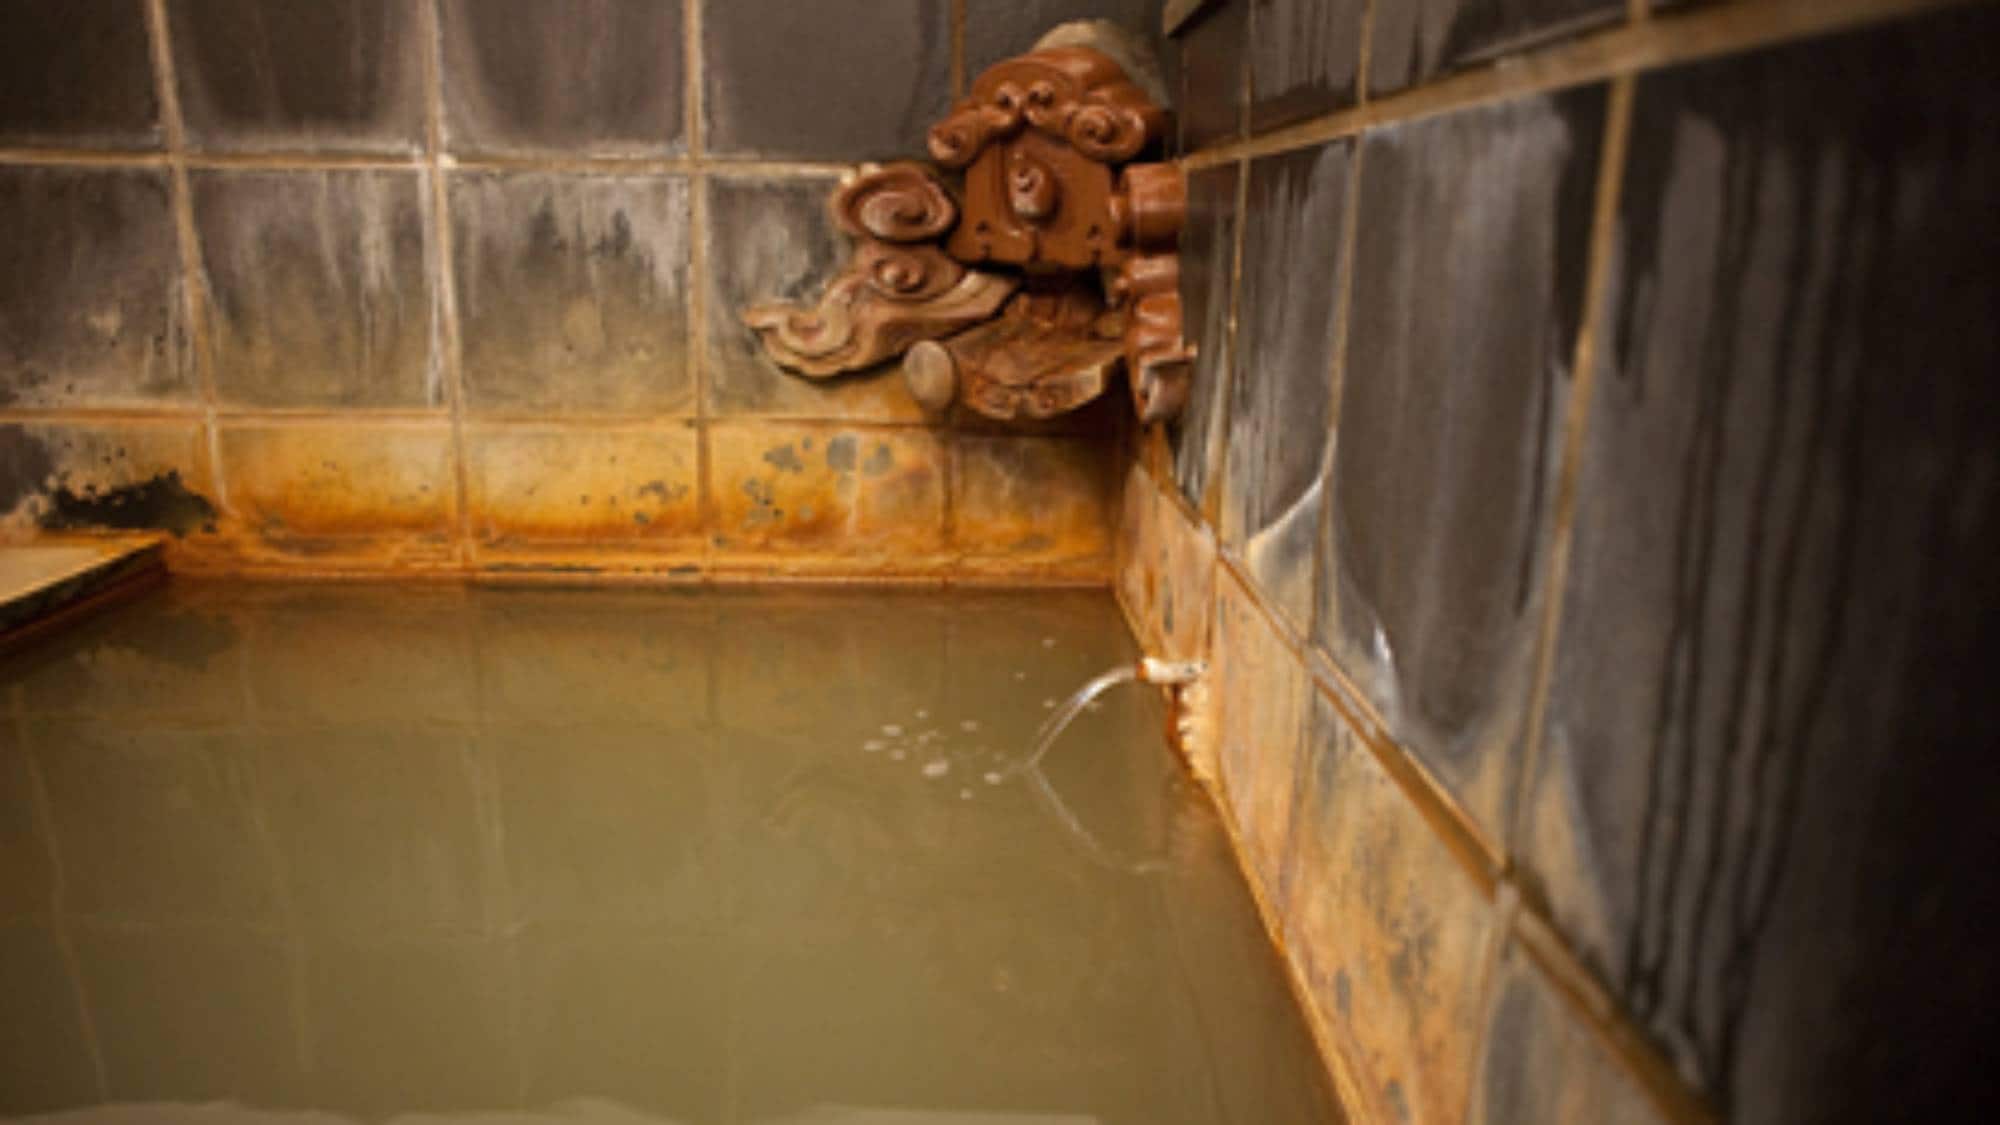 ・ [Bathroom] The source of Yunotsu Onsen is flowing! Please enjoy the hot water that is also popular as a hot spring with high medicinal properties.